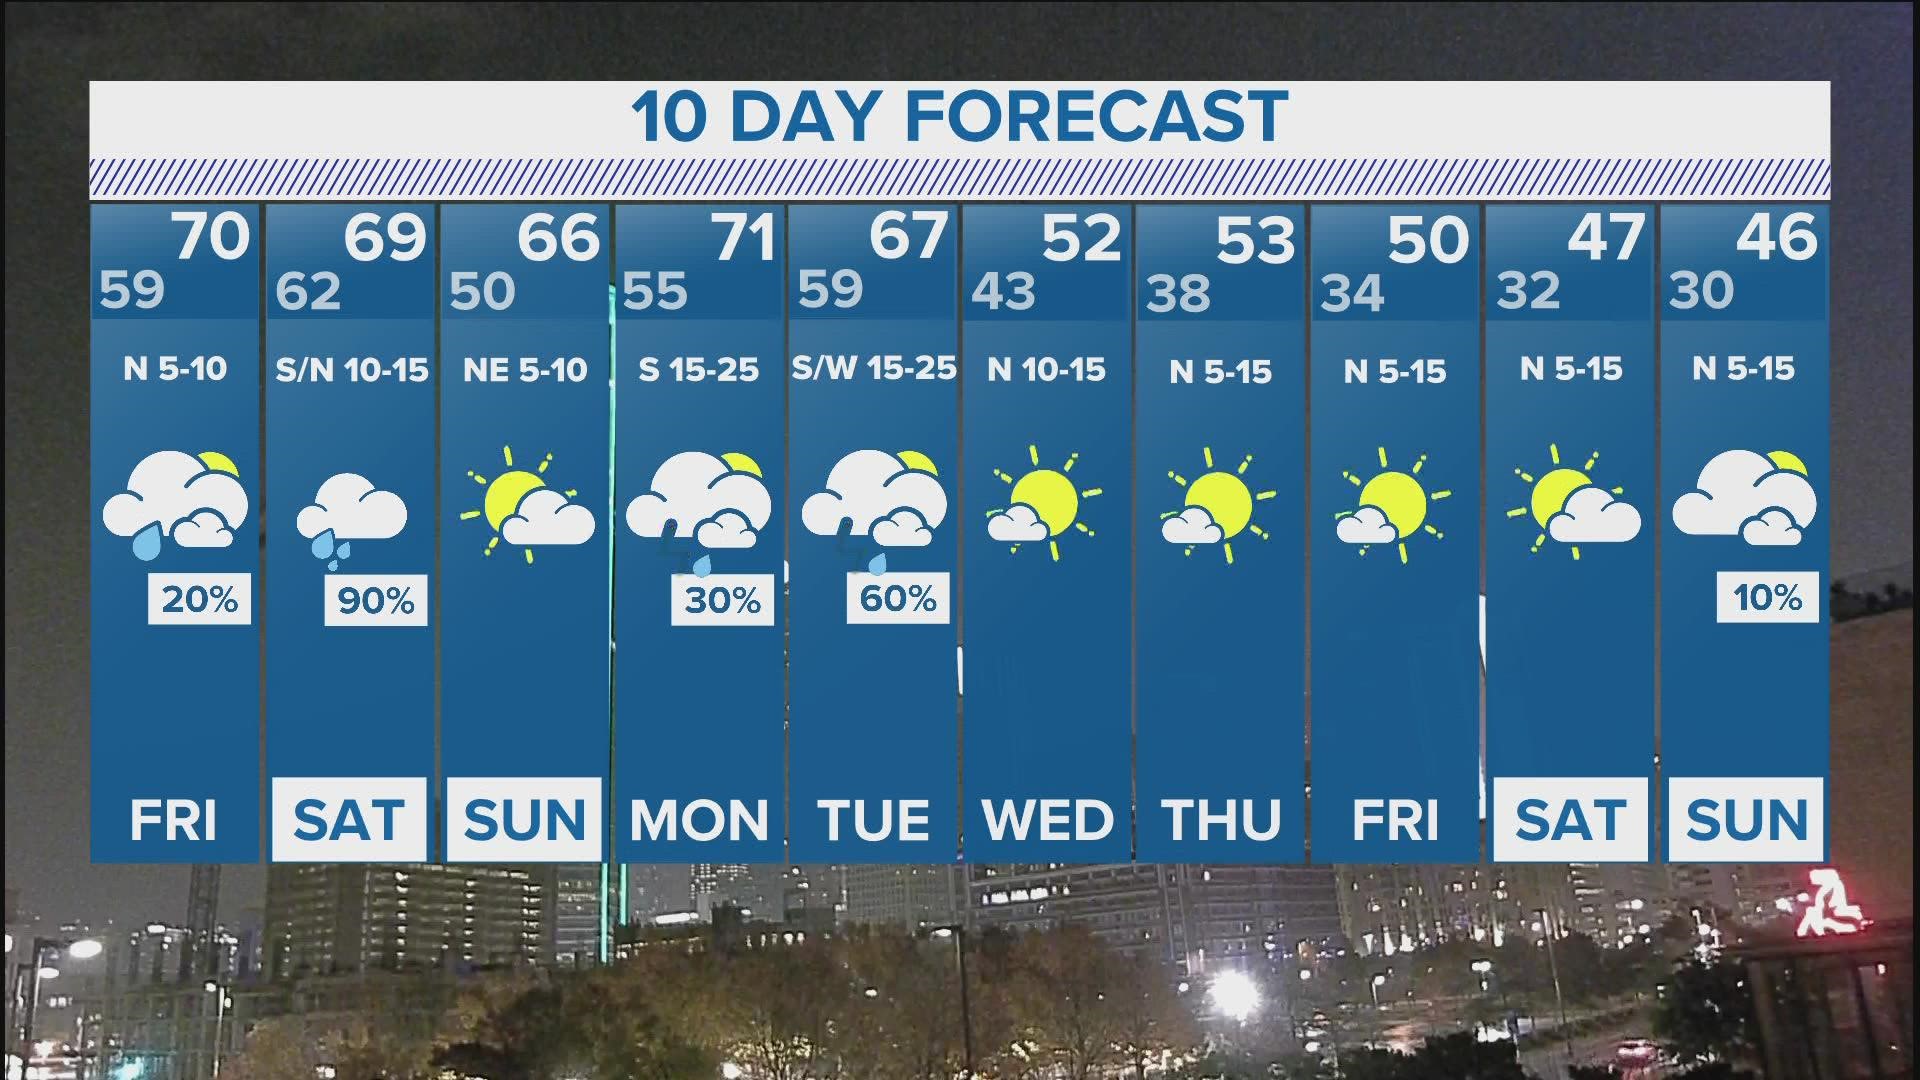 More rain and fog are expected overnight with another cold front coming in this weekend.